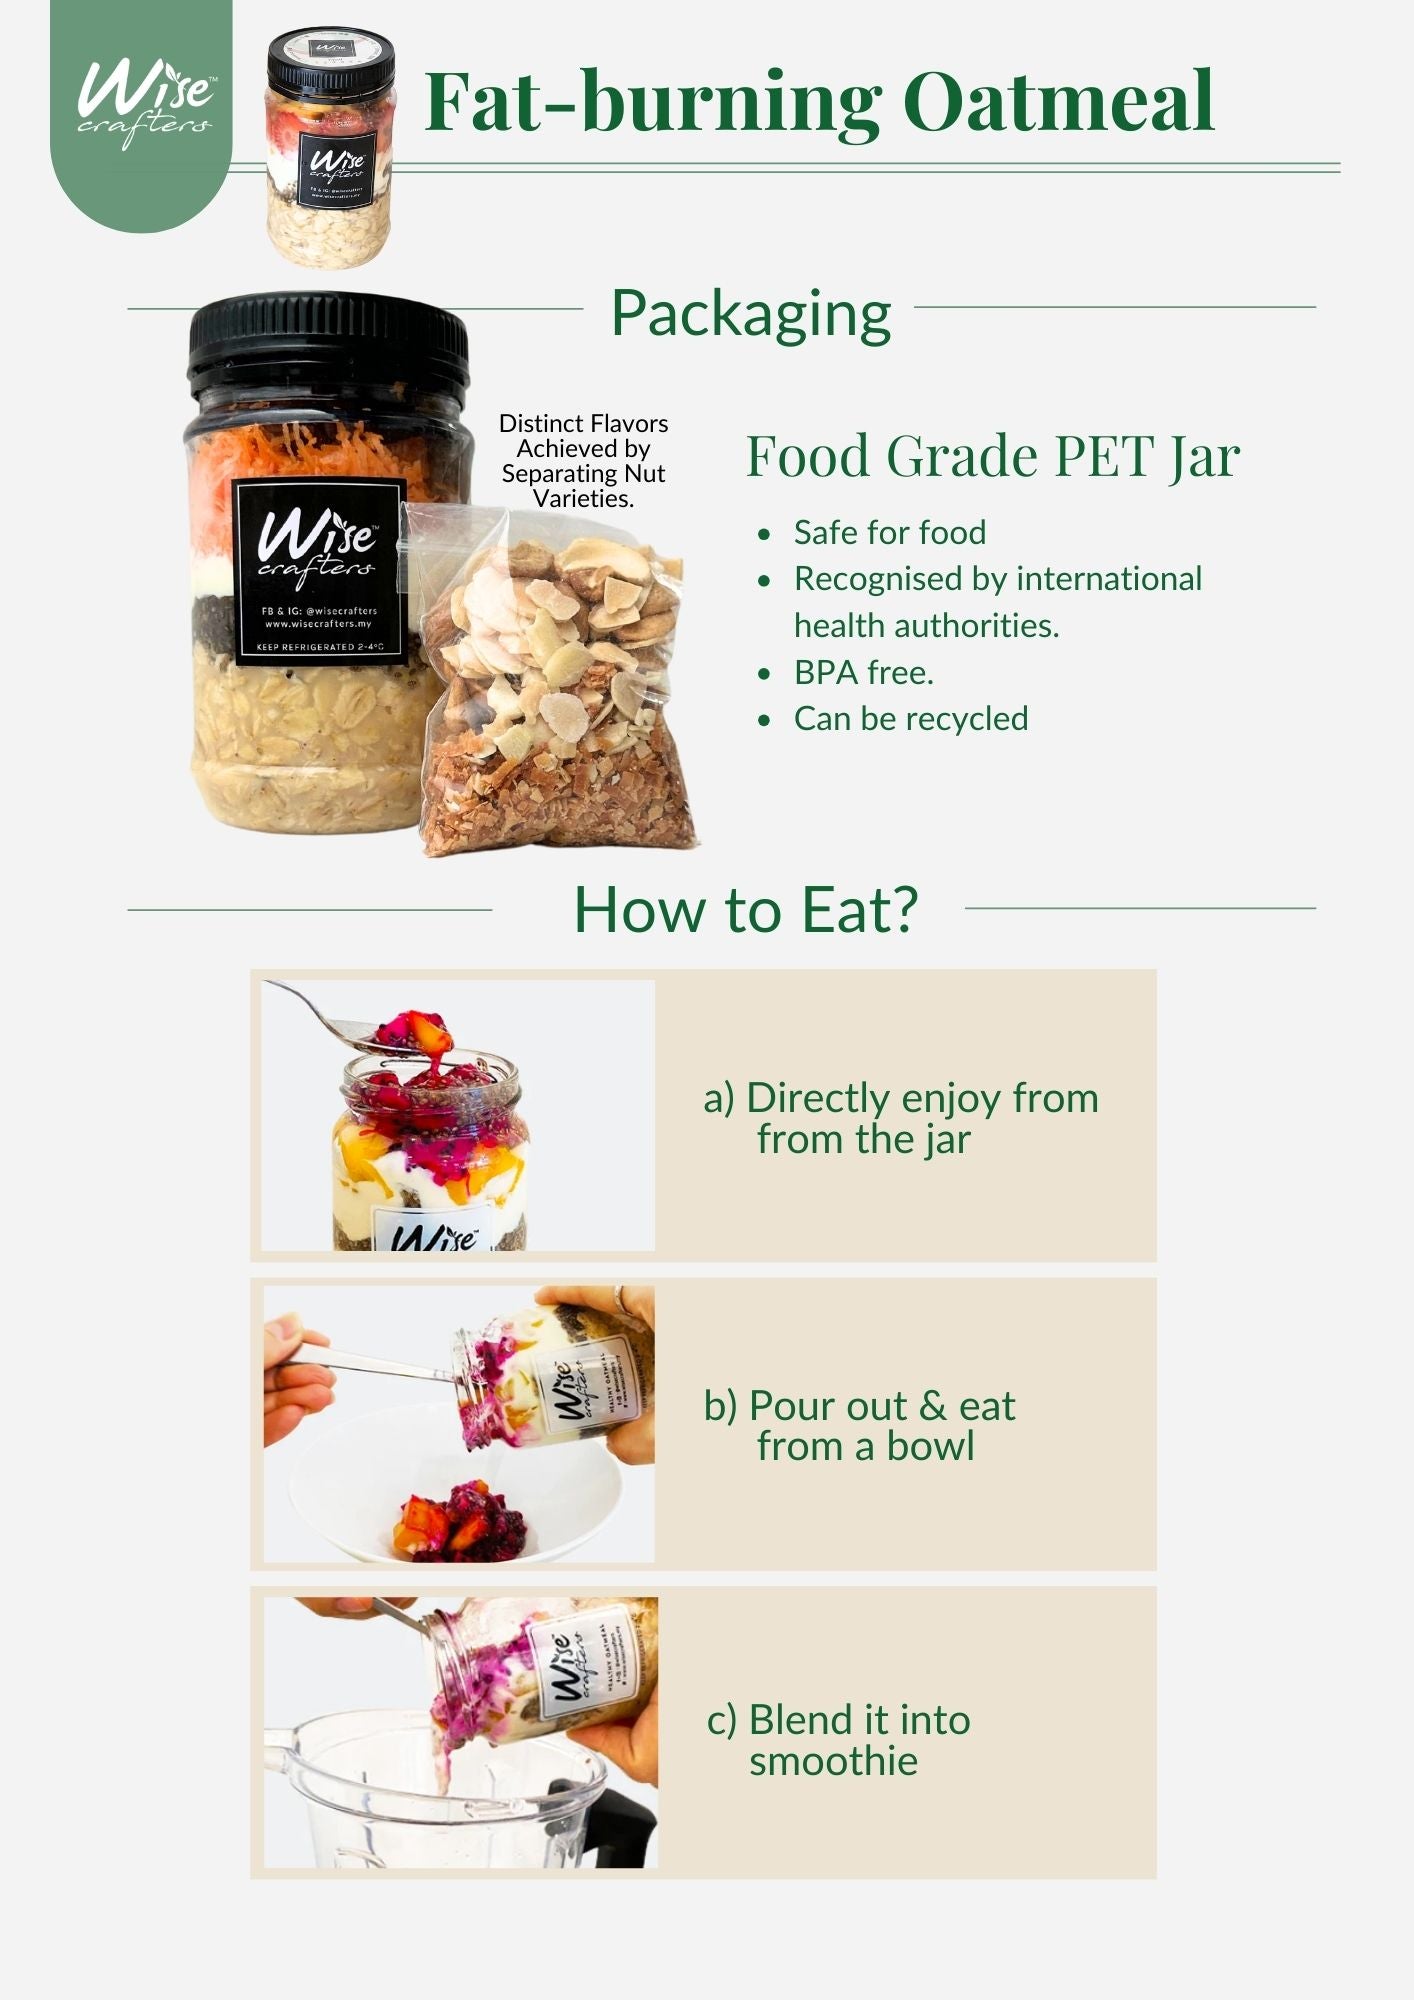 21 Fit-Meals Combo (Free Delivery)